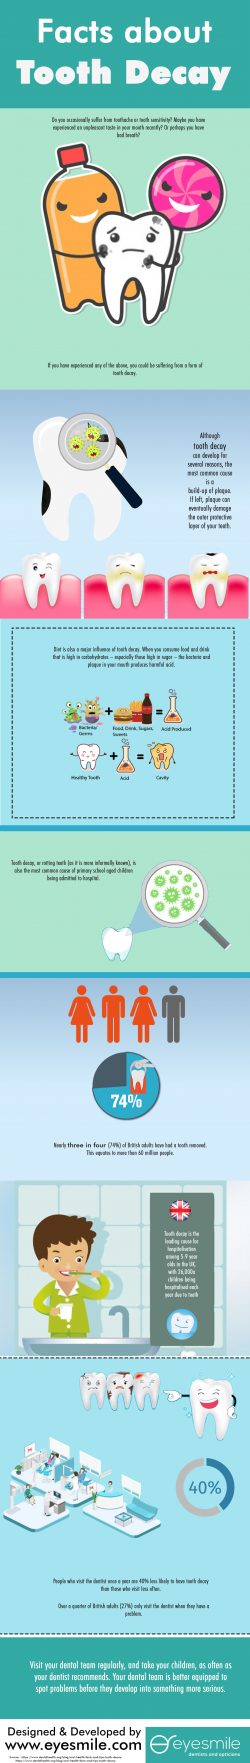 Facts about tooth decay